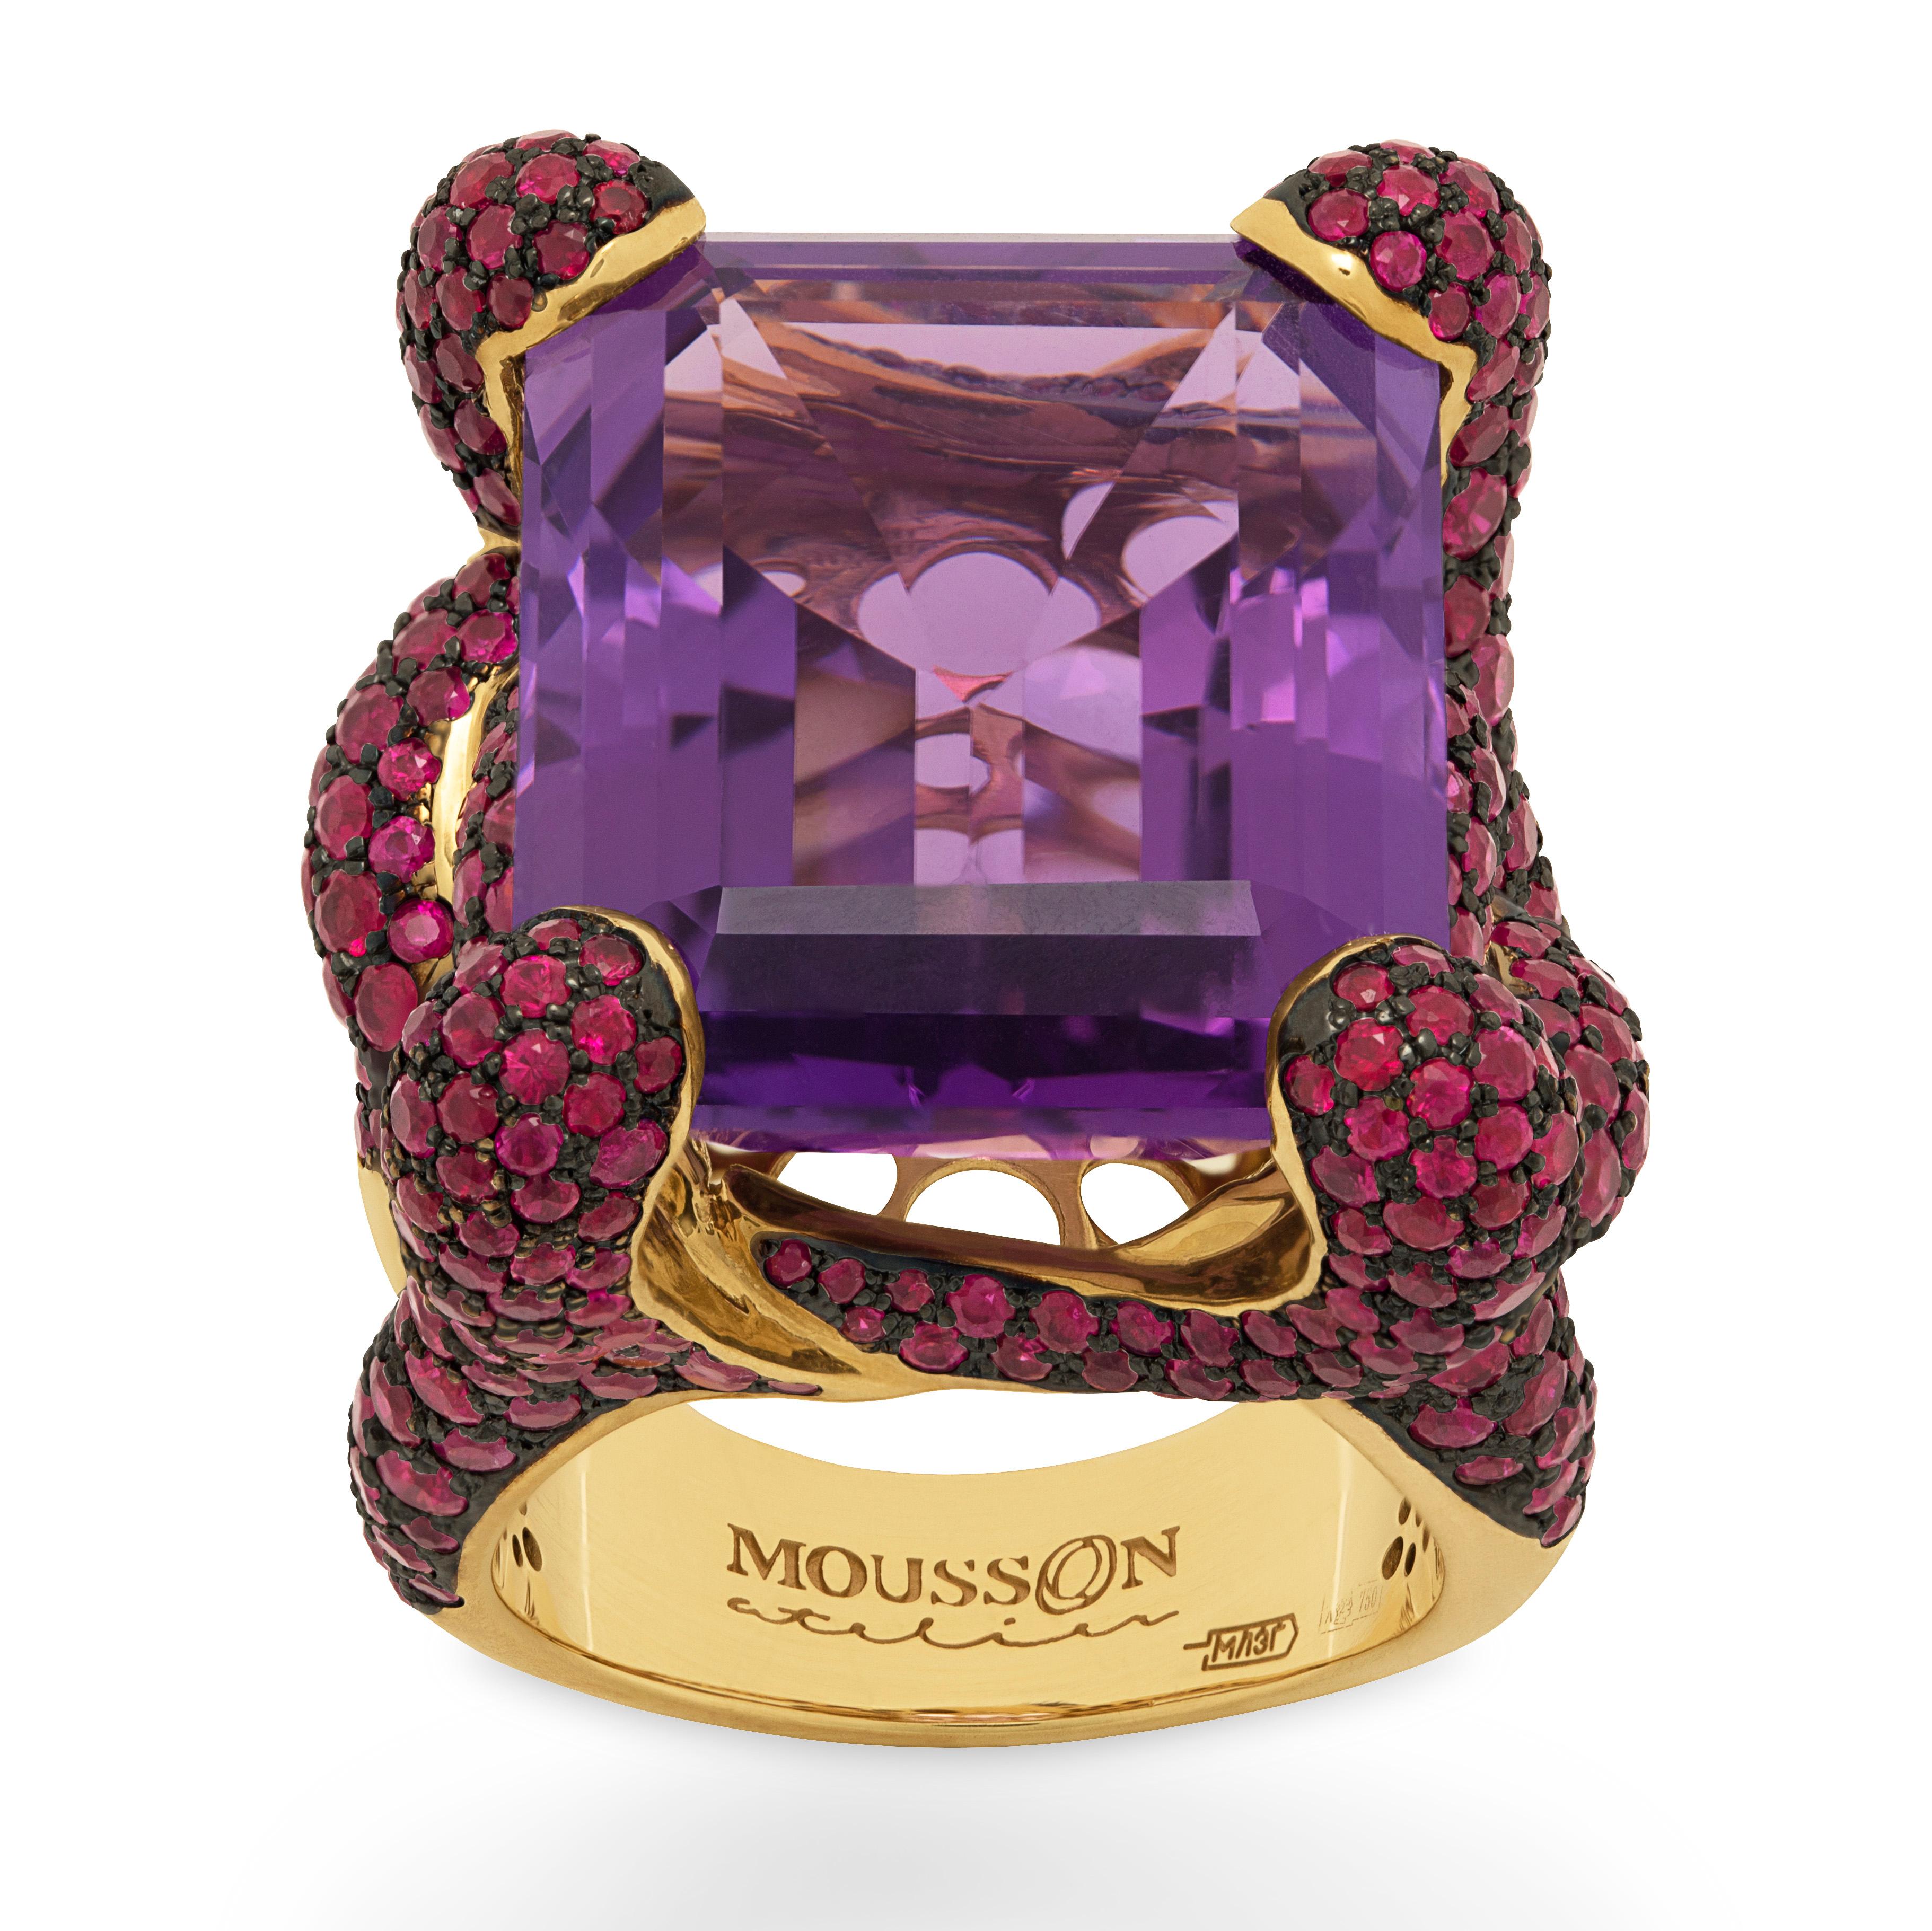 Amethyst 27.38 Carat Ruby 18 Karat Yellow Gold New Age Ring
Look at this spectacular Amethyst 27.38 Ct and 452 Rubies weighing 8.36 Carat combination. This gleaming ensemble creates a feeling of love and passion. Yellow 18 Karat Gold shape looks